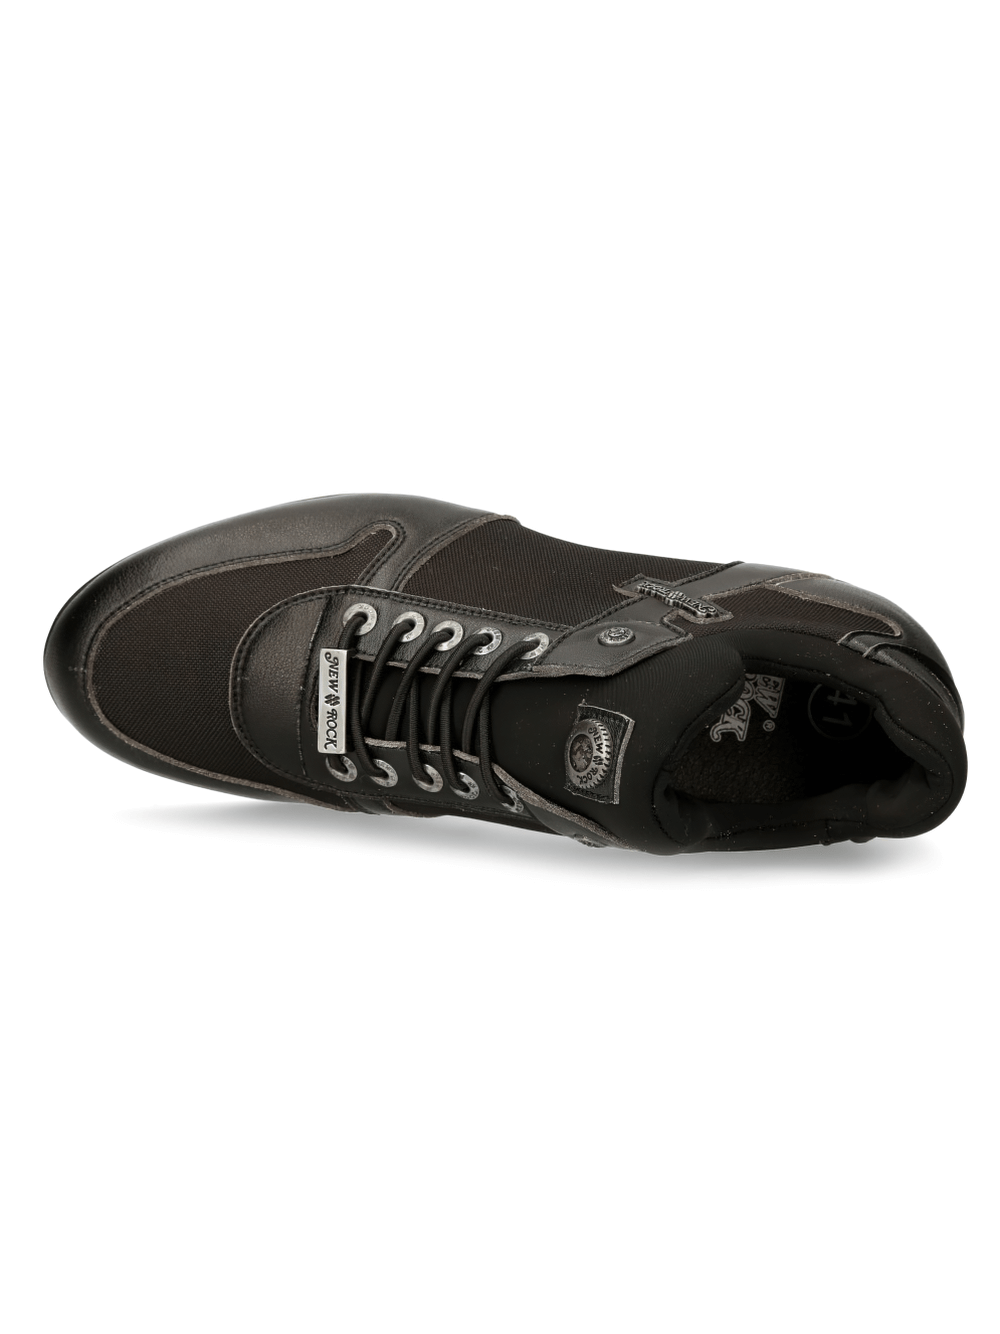 NEW ROCK Trendy Urban Black Hybrid Sneakers With Lacing